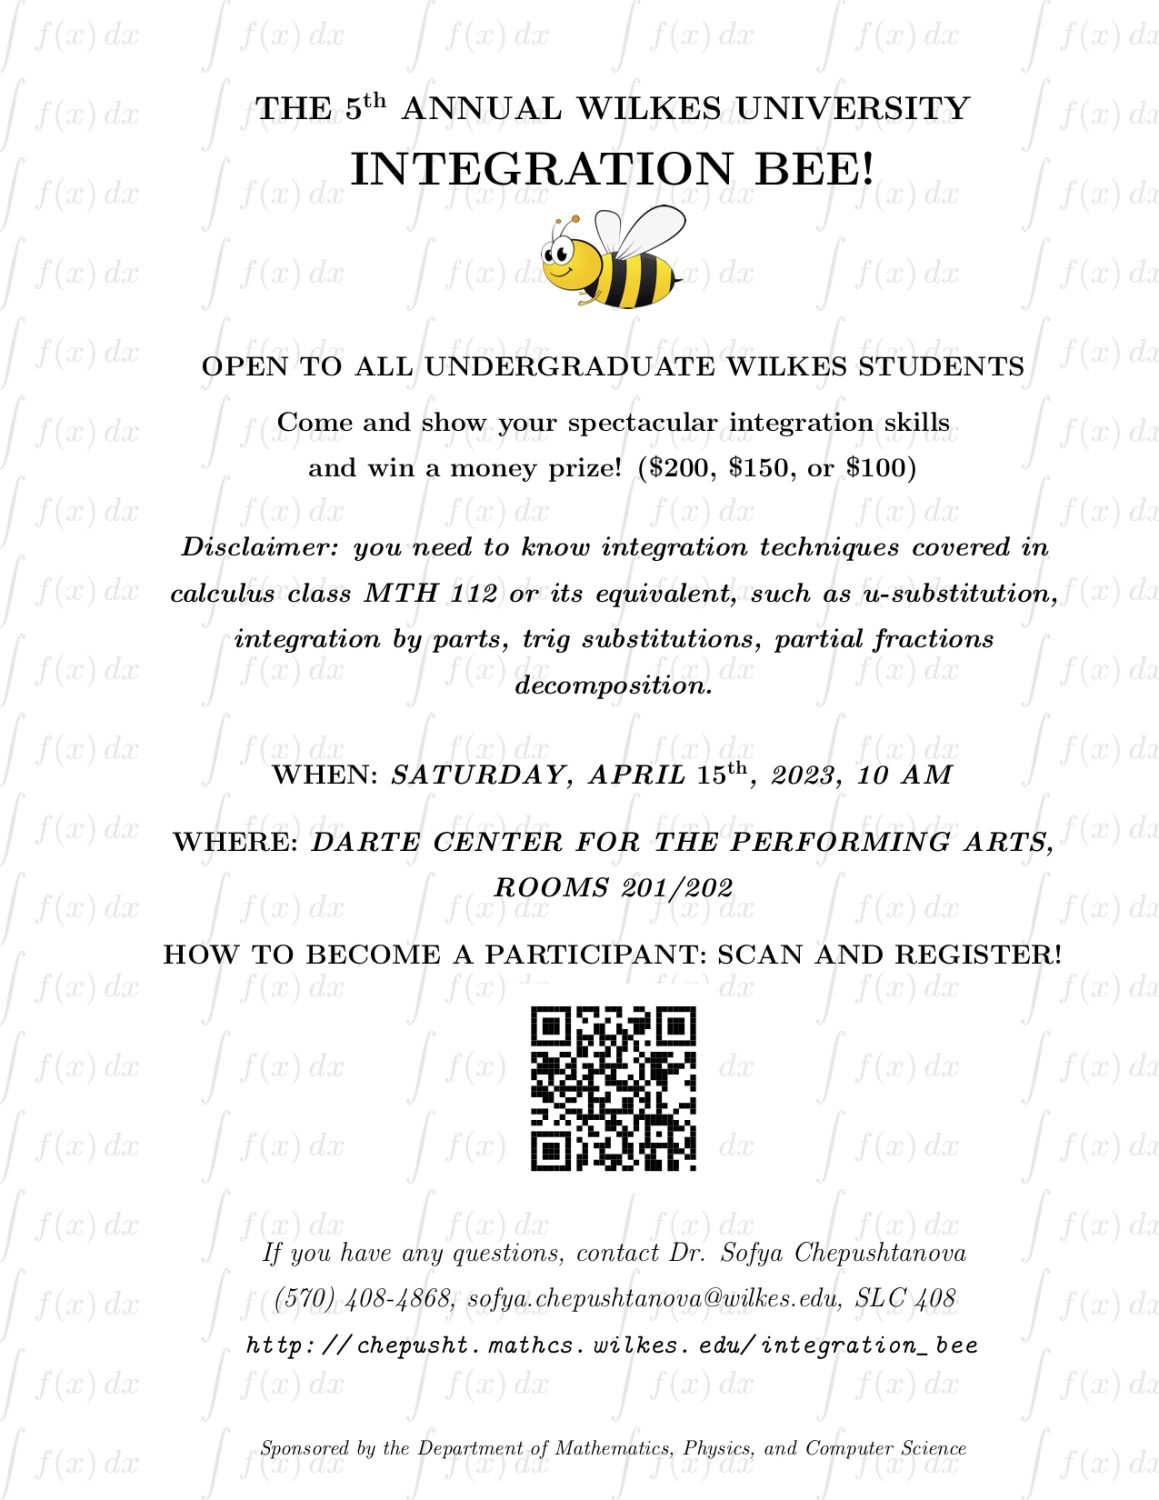 integration bee flyer with QR code